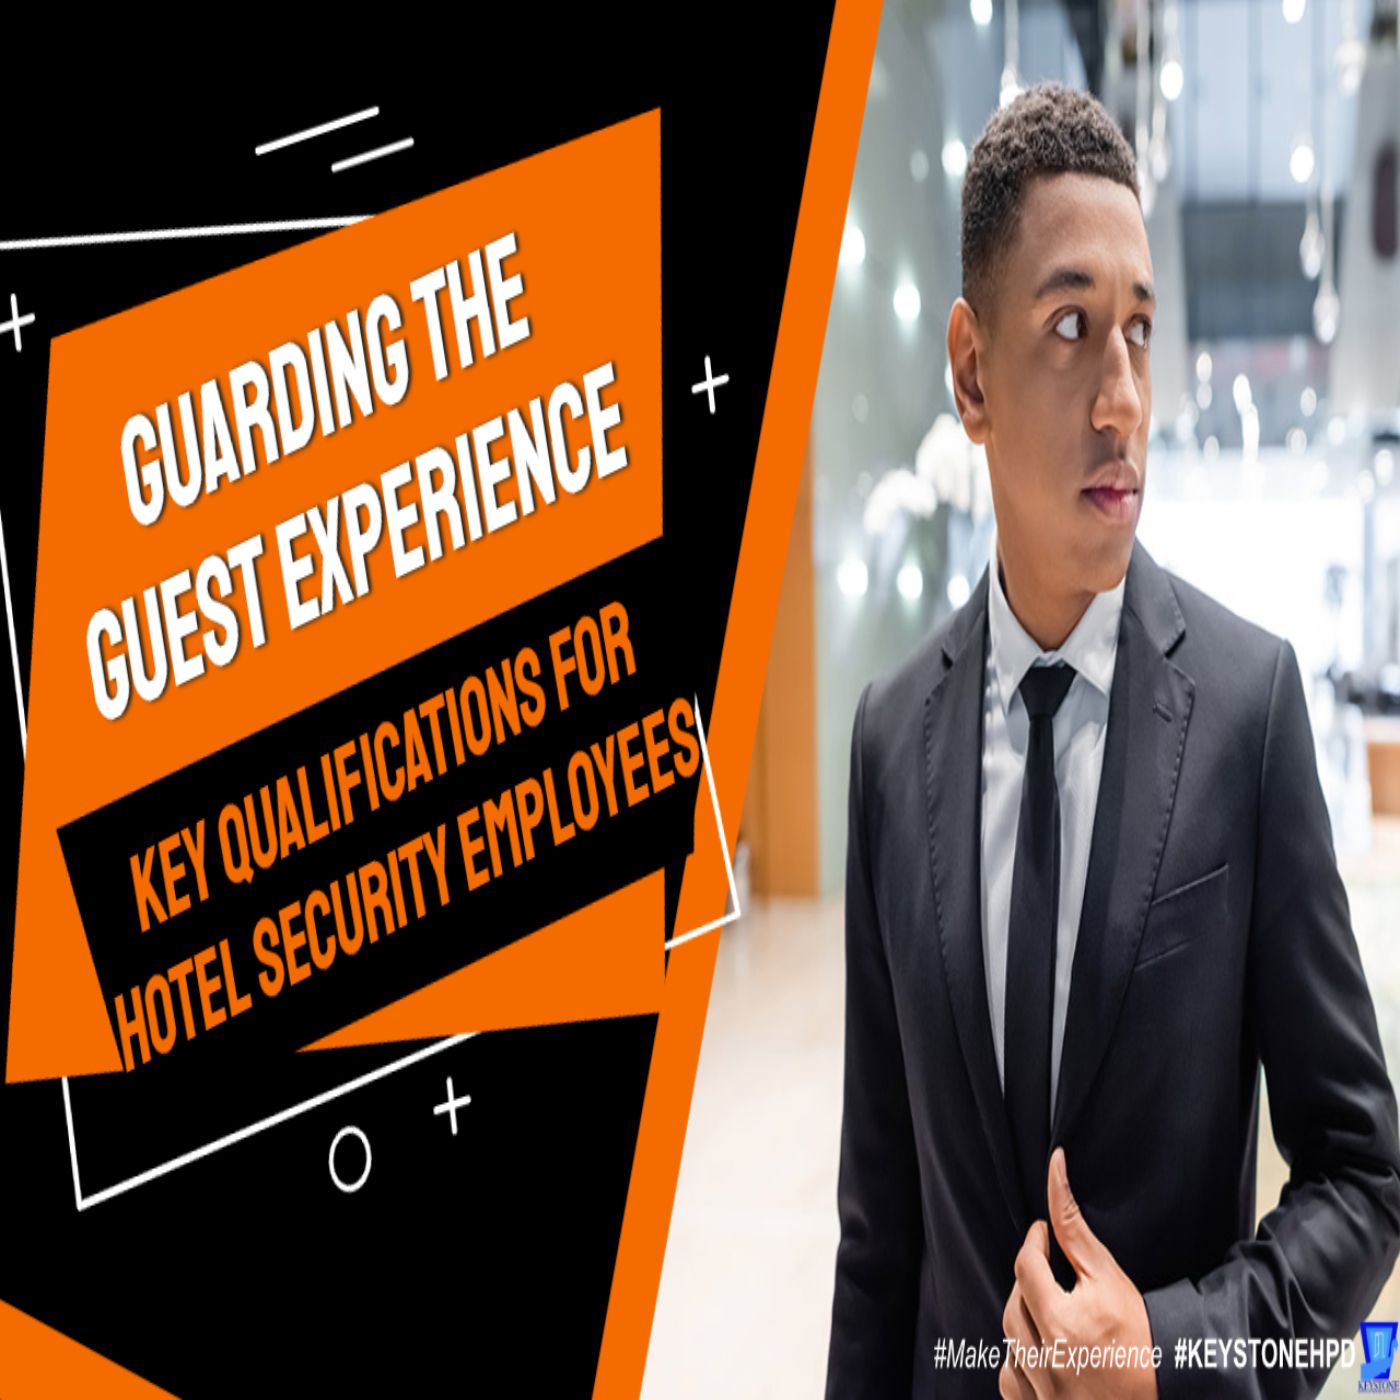 Guarding the Guest Experience: Key Qualifications for Hotel Security Employees | Eps. #351